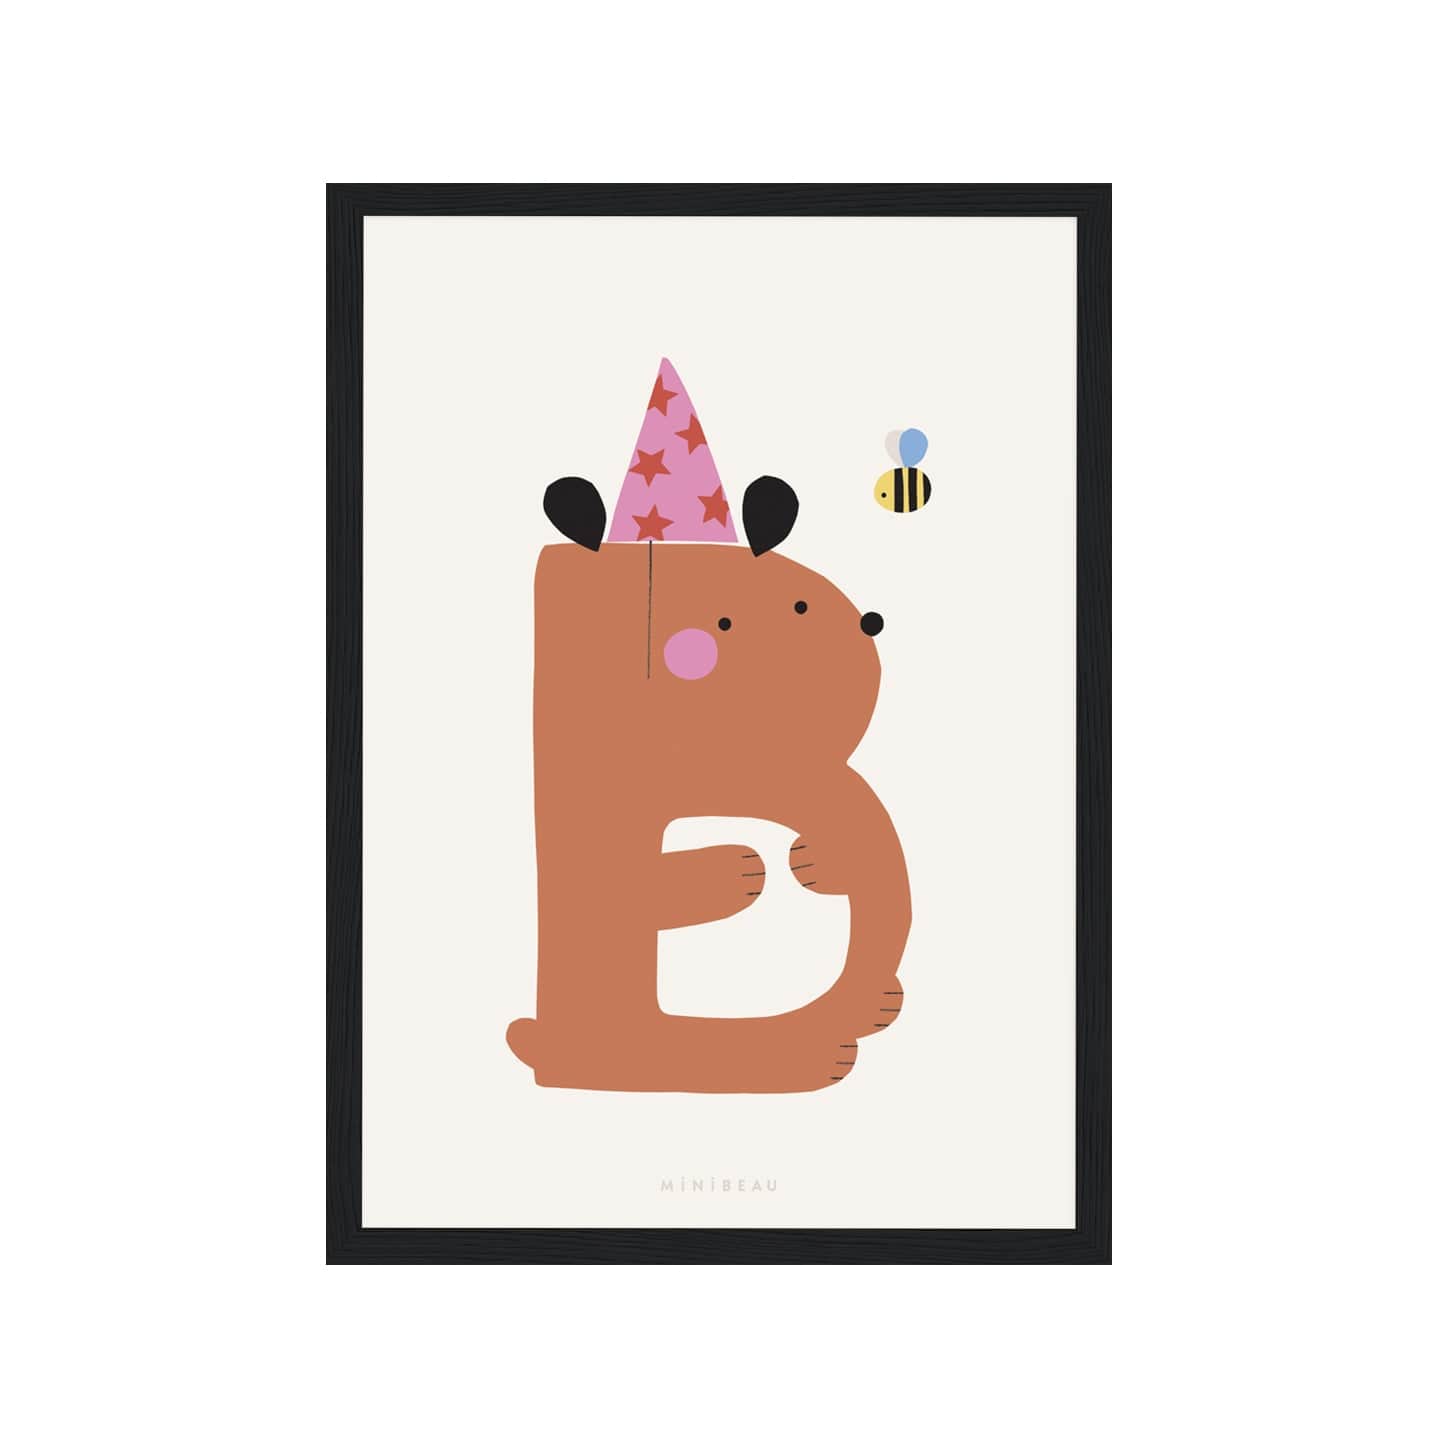 Art print in black frame. Our Happy Alphabet 'B' Art Print shows a brown bear with a white tummy in the shape of a B in a pink party hat with red stars on, with a bee buzzing around it's head. On a neutral background.